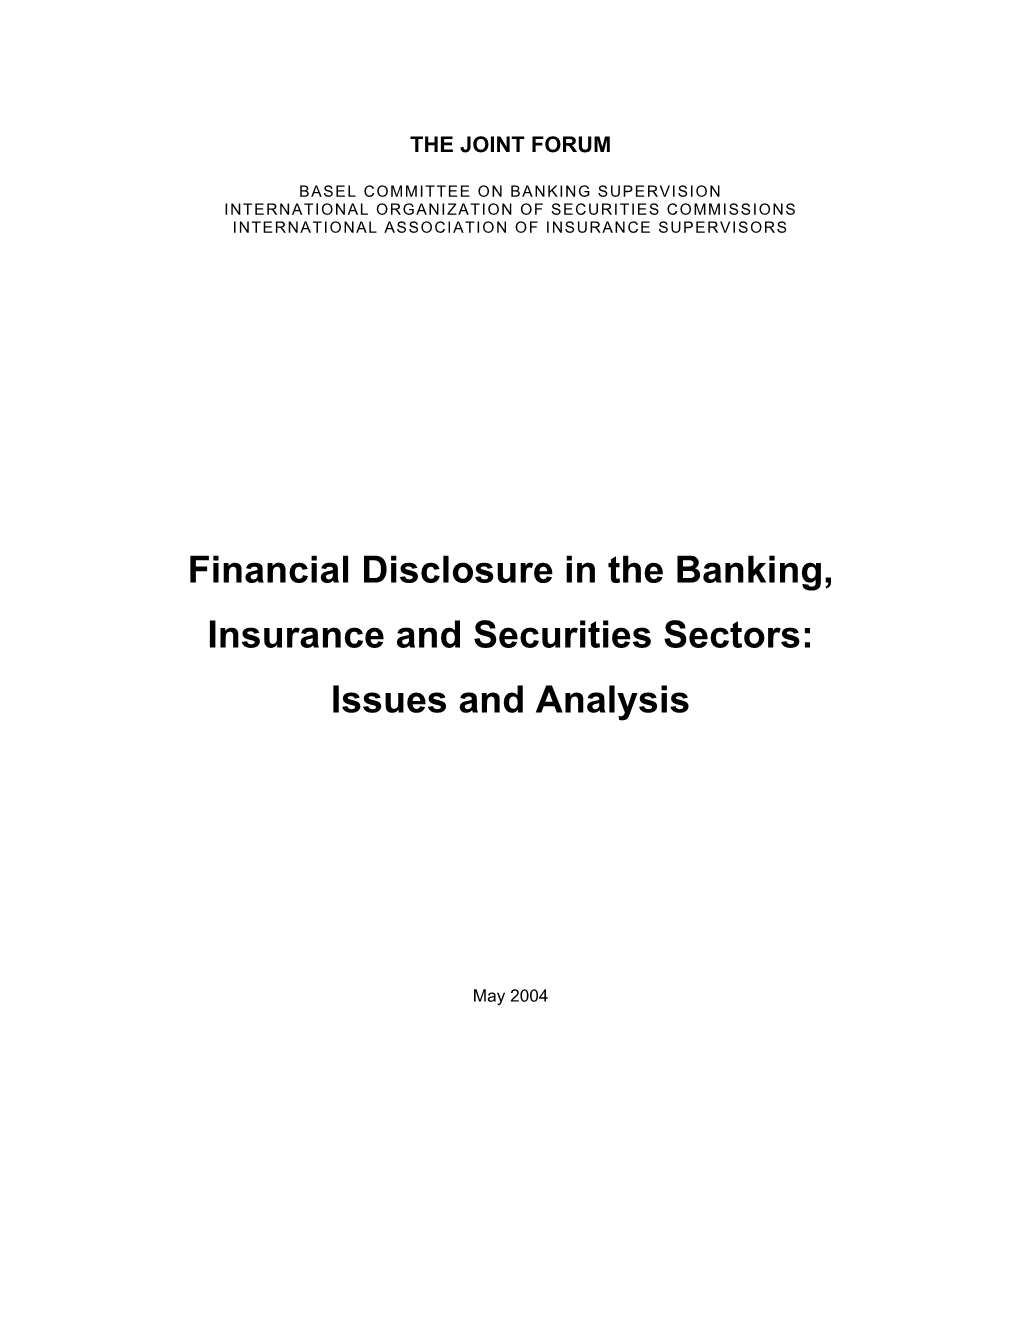 Financial Disclosure in the Banking, Insurance and Securities Sectors: Issues and Analysis